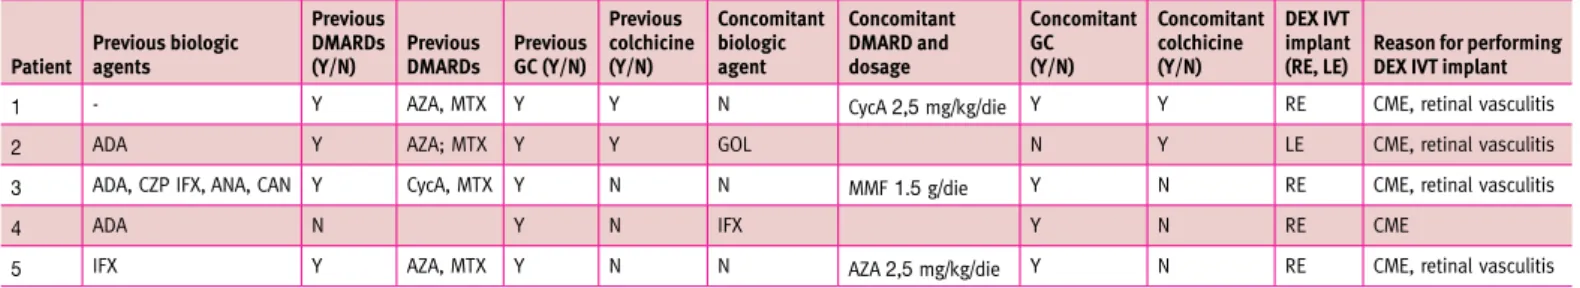 Table 2. Previous and concomitant treatments of the patients enrolled